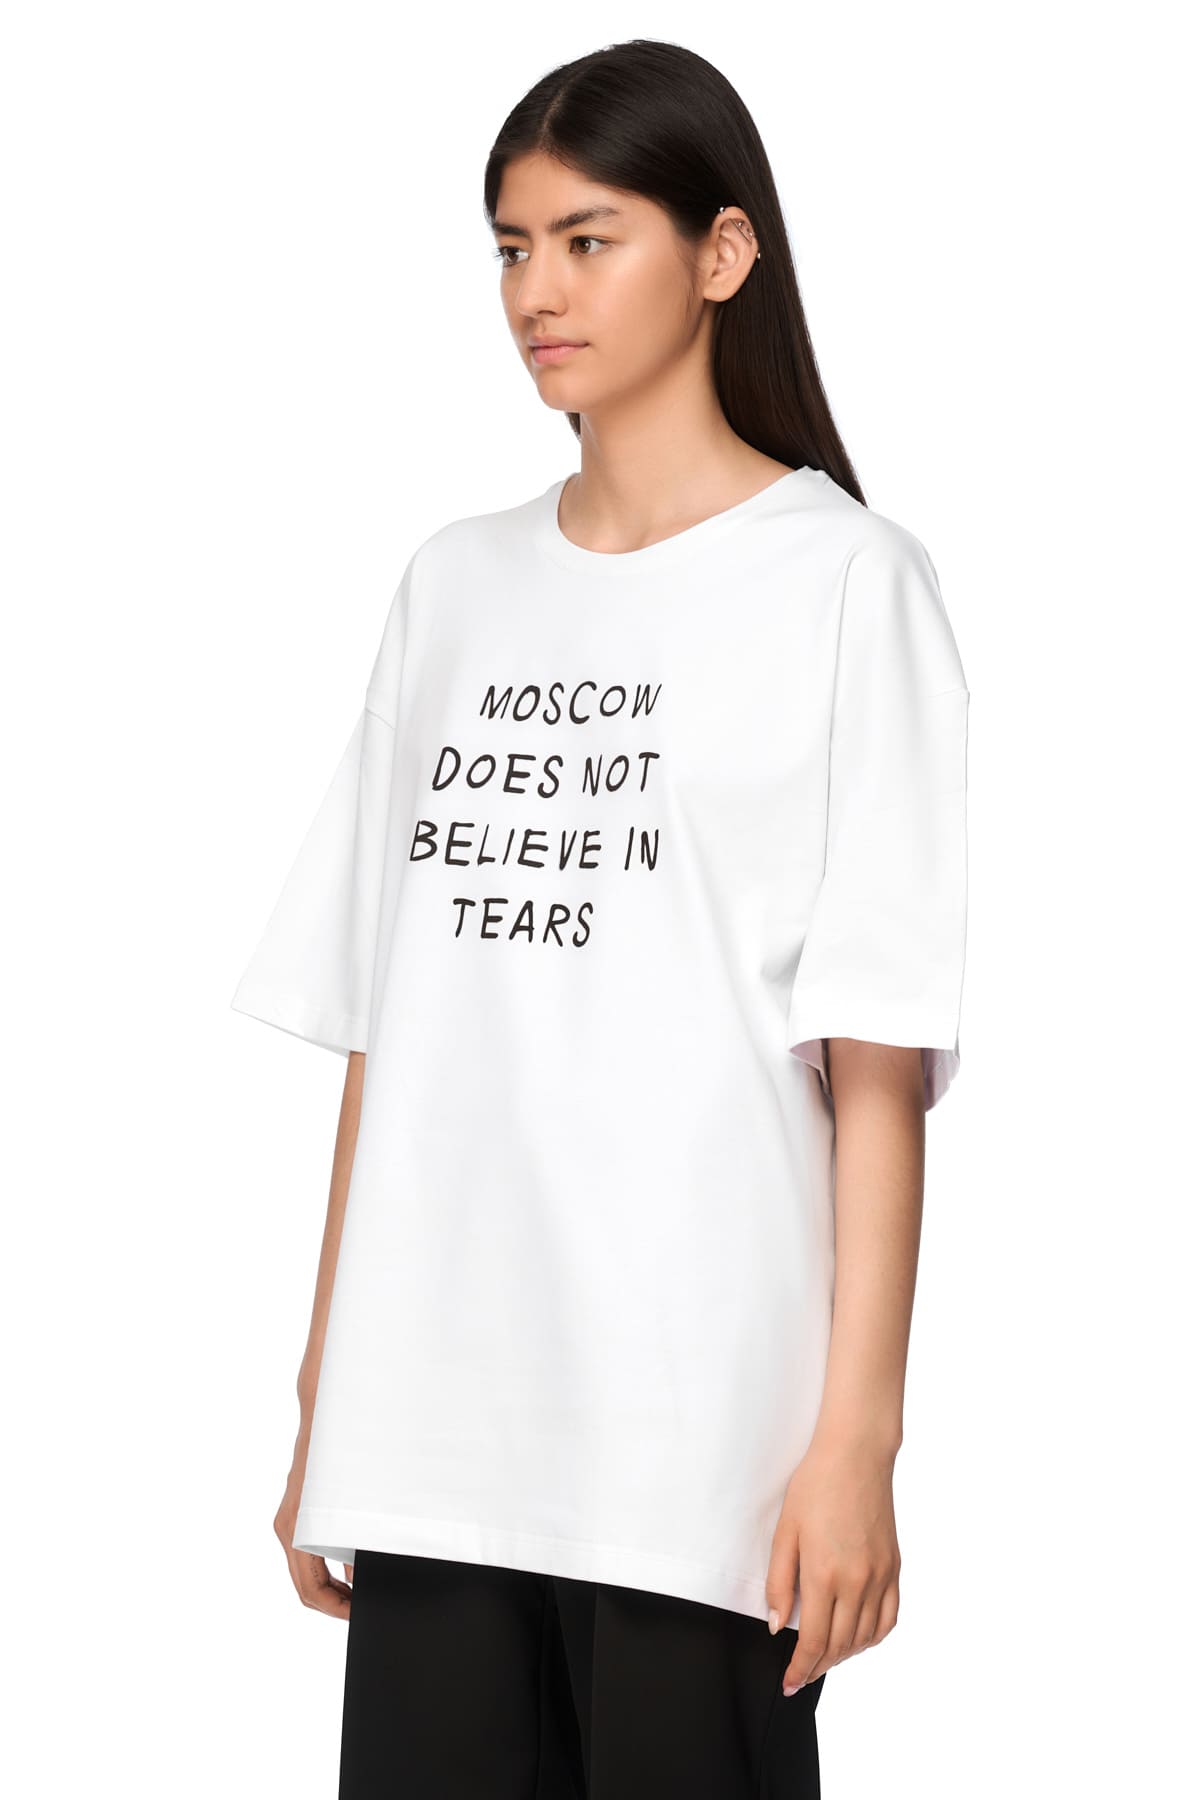 Moscow does not believe in tears T-shirt